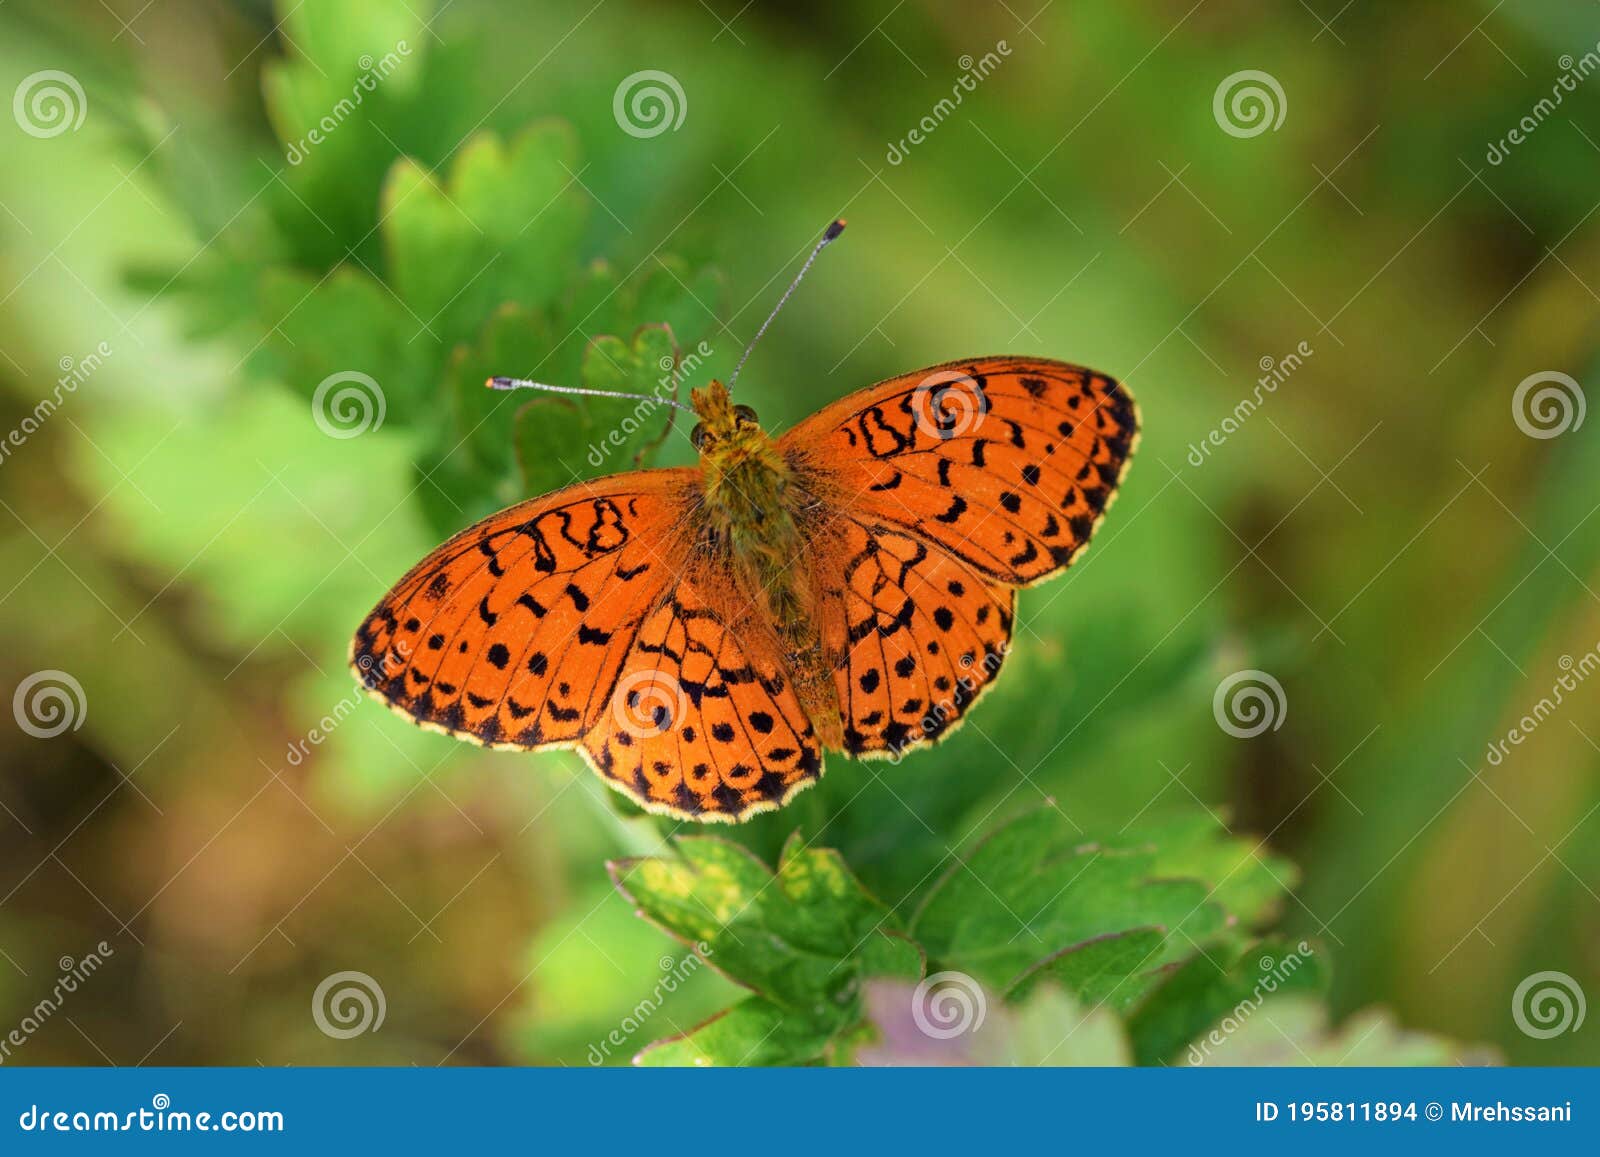 brenthis ino , the lesser marbled fritillary butterfly